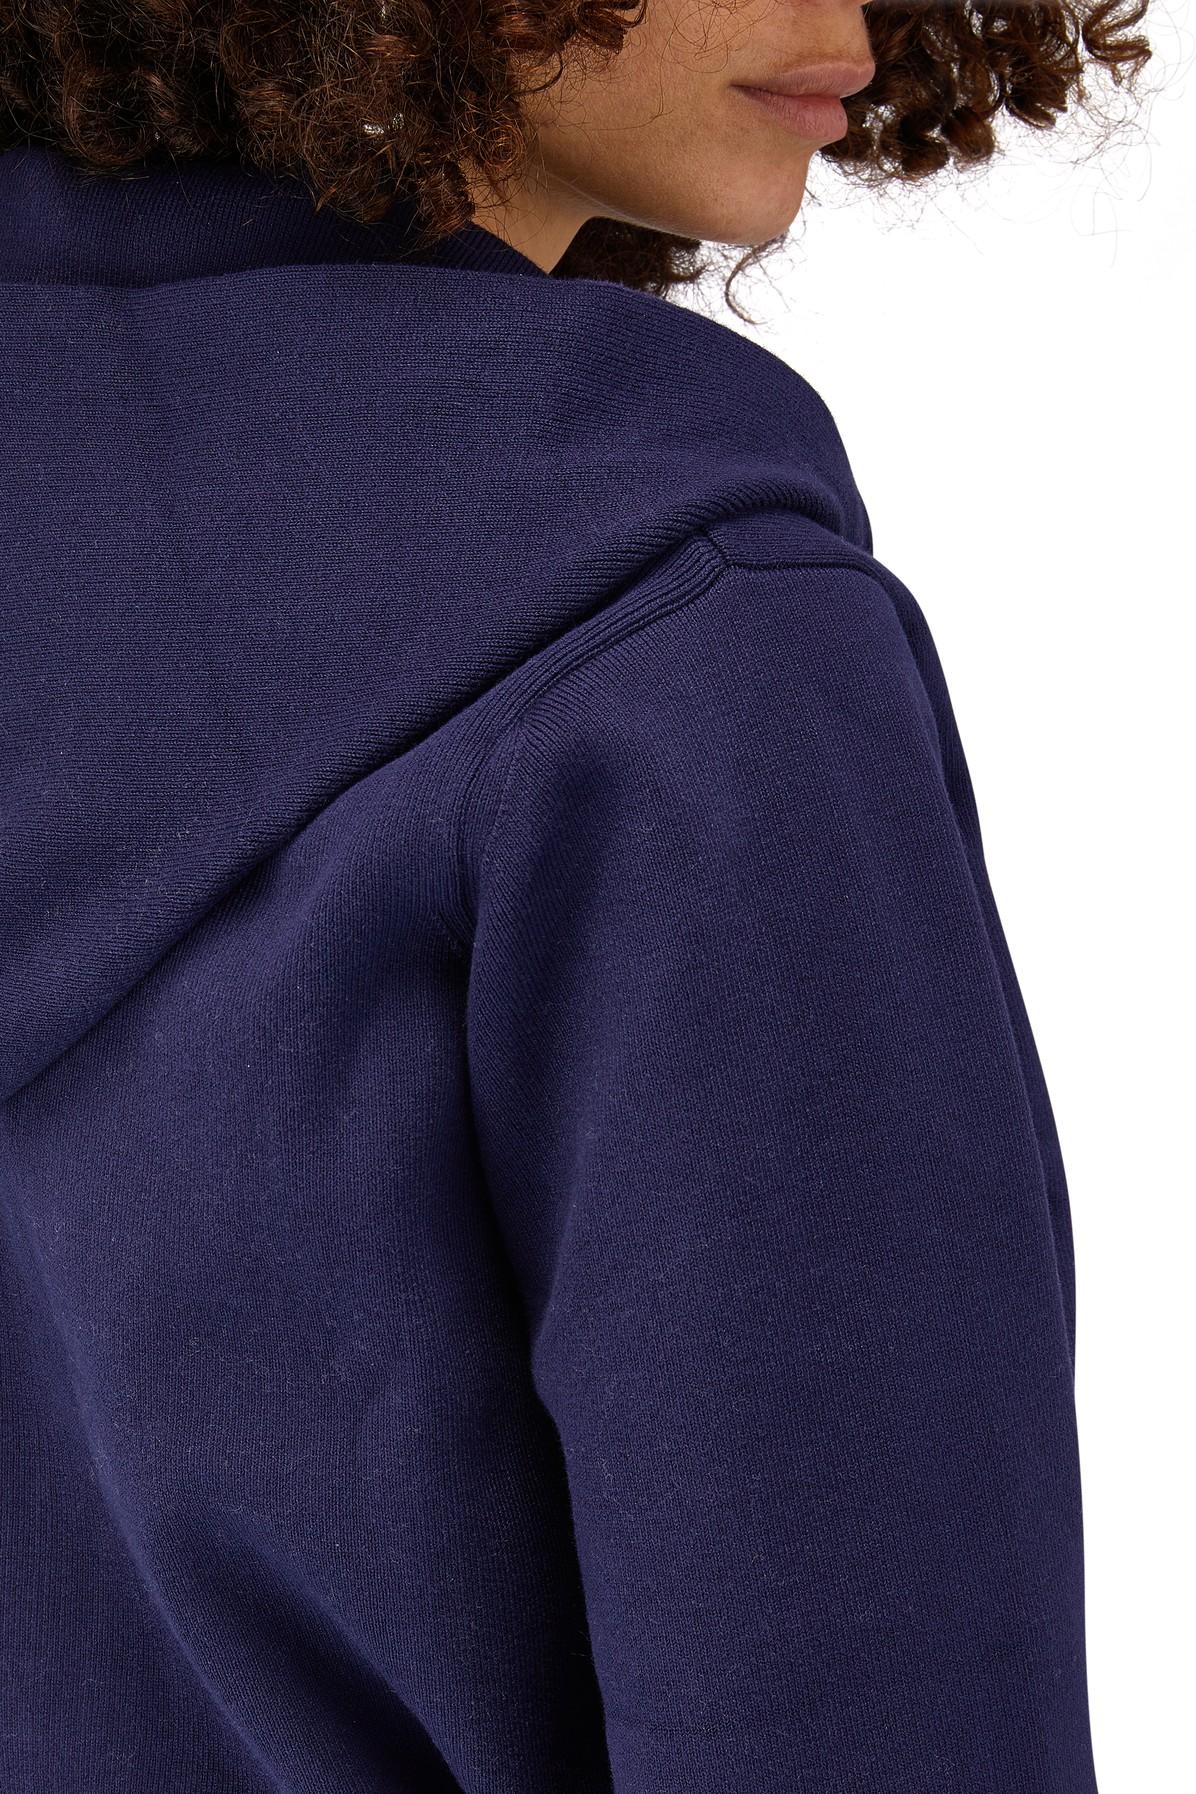 Marc Jacobs The Cropped Zip Hoodie in Blue | Lyst